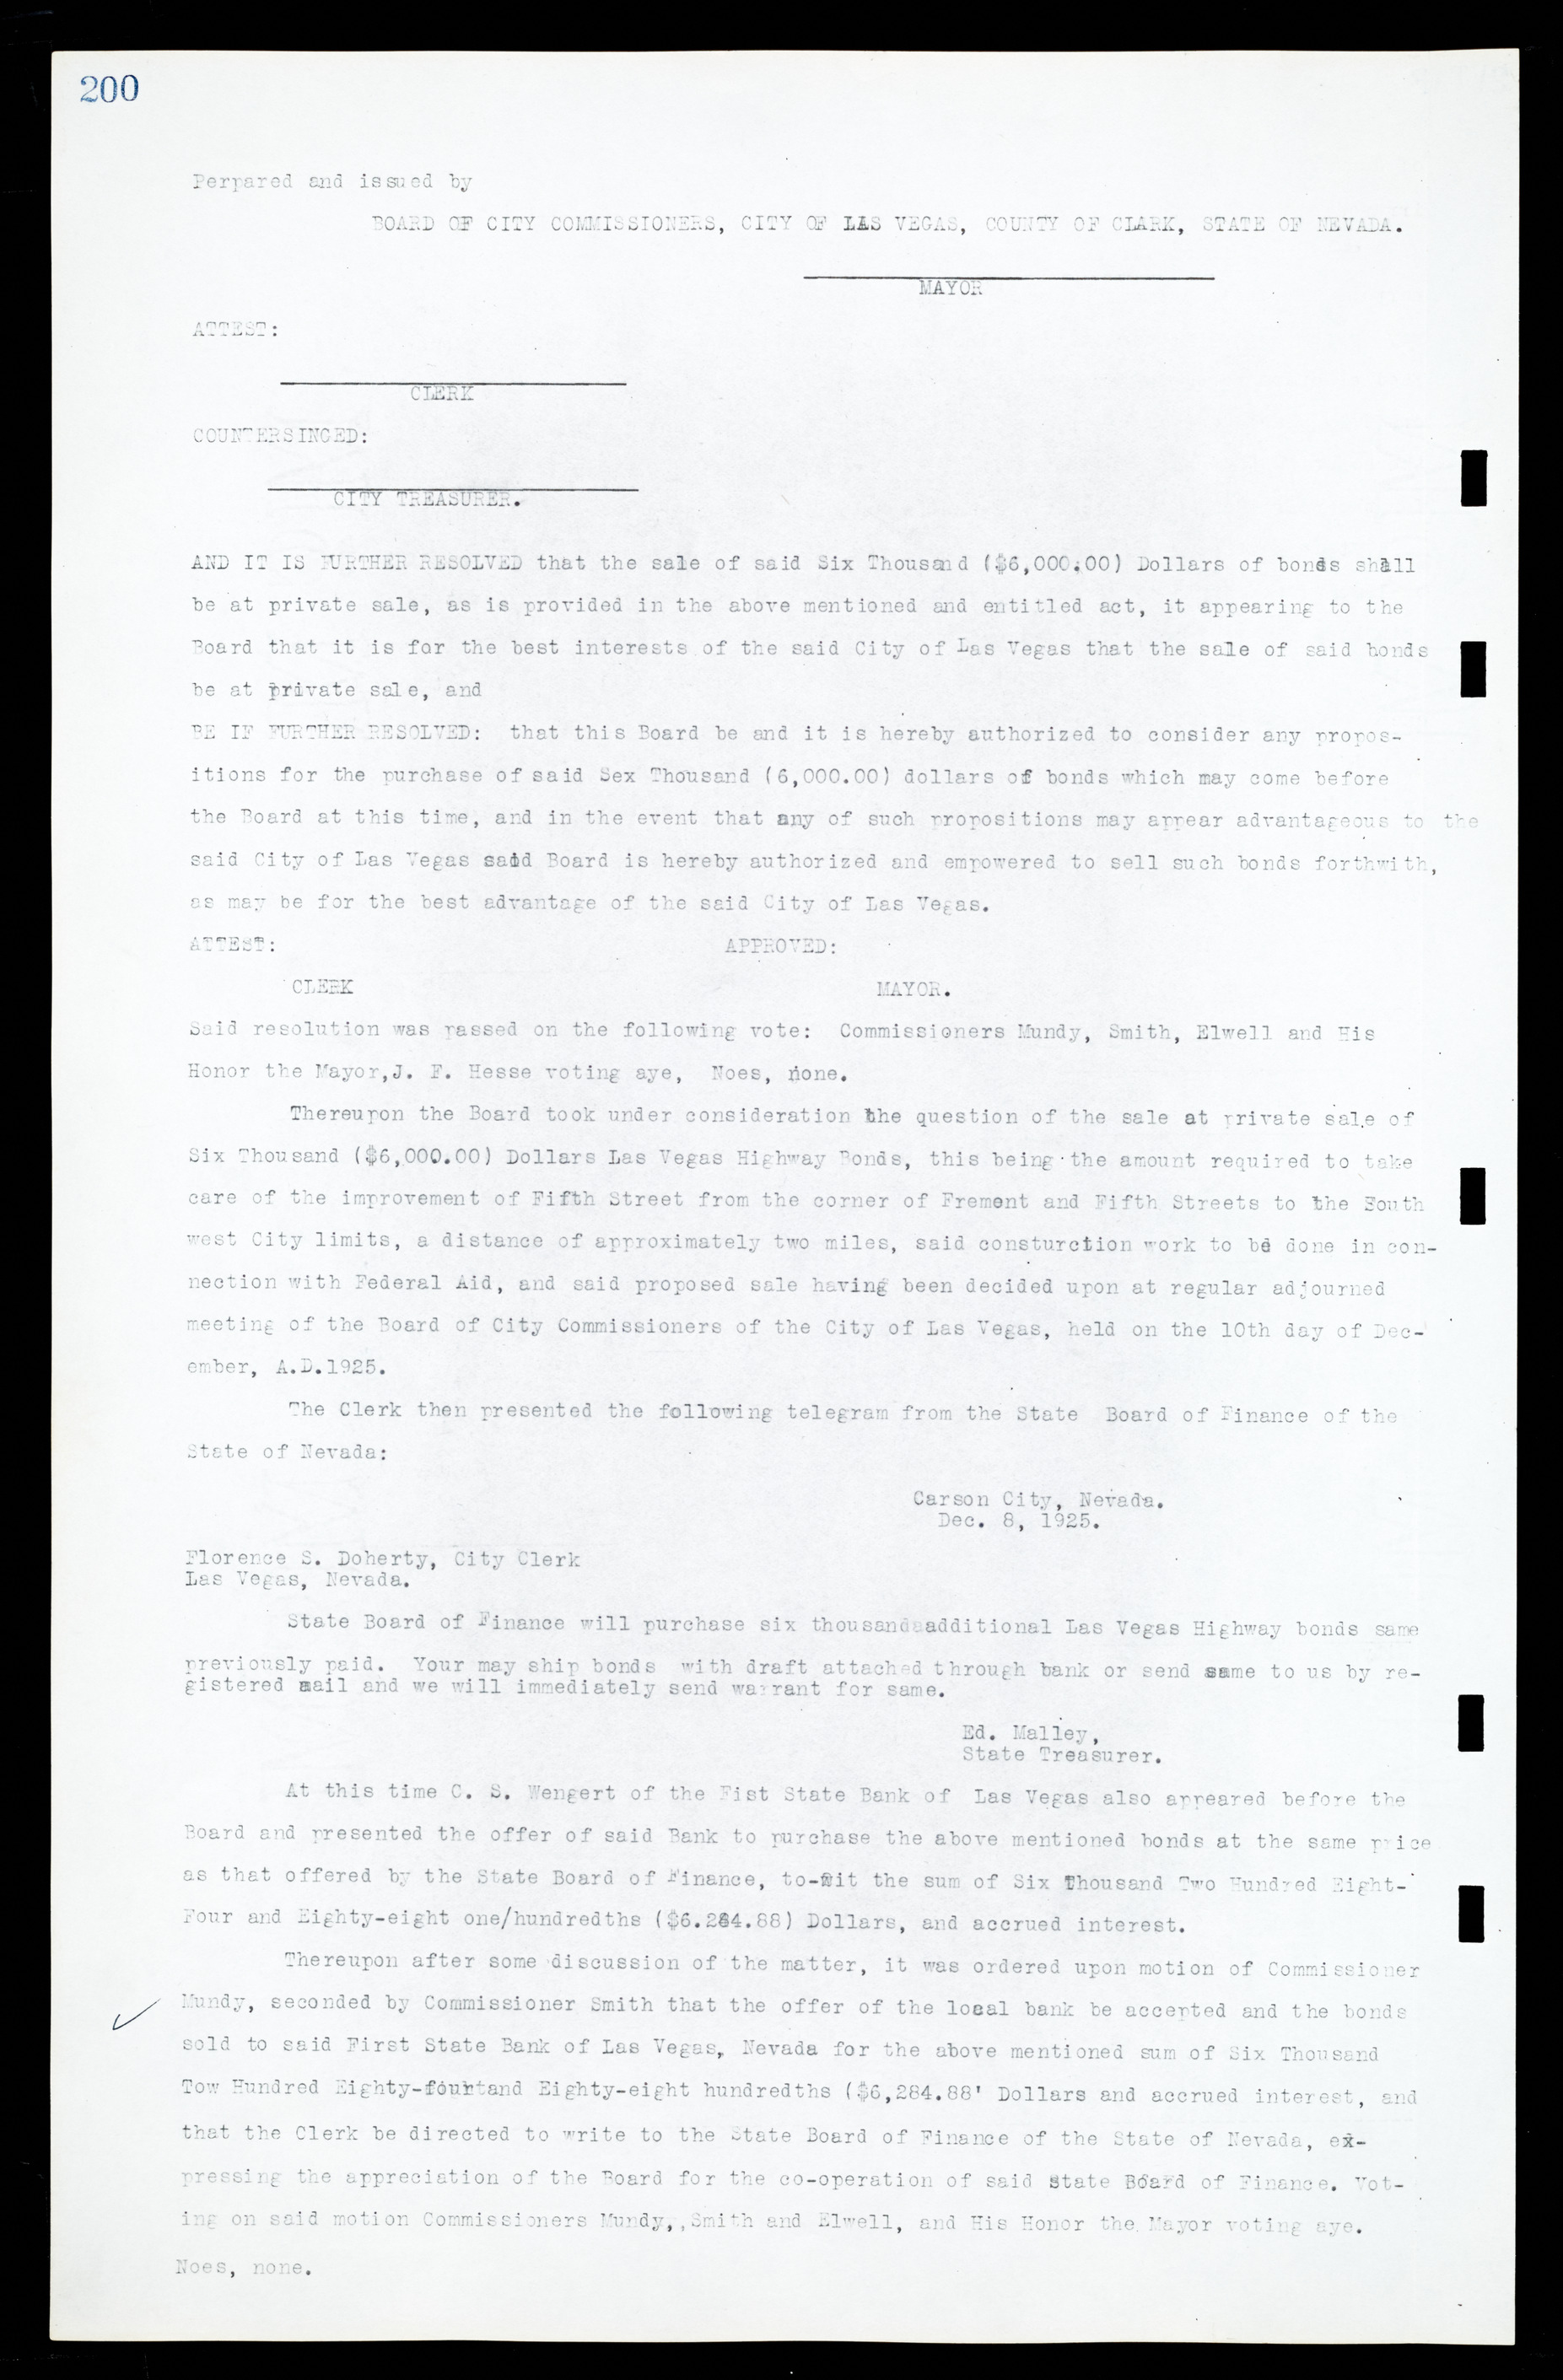 Las Vegas City Commission Minutes, March 1, 1922 to May 10, 1929, lvc000002-207